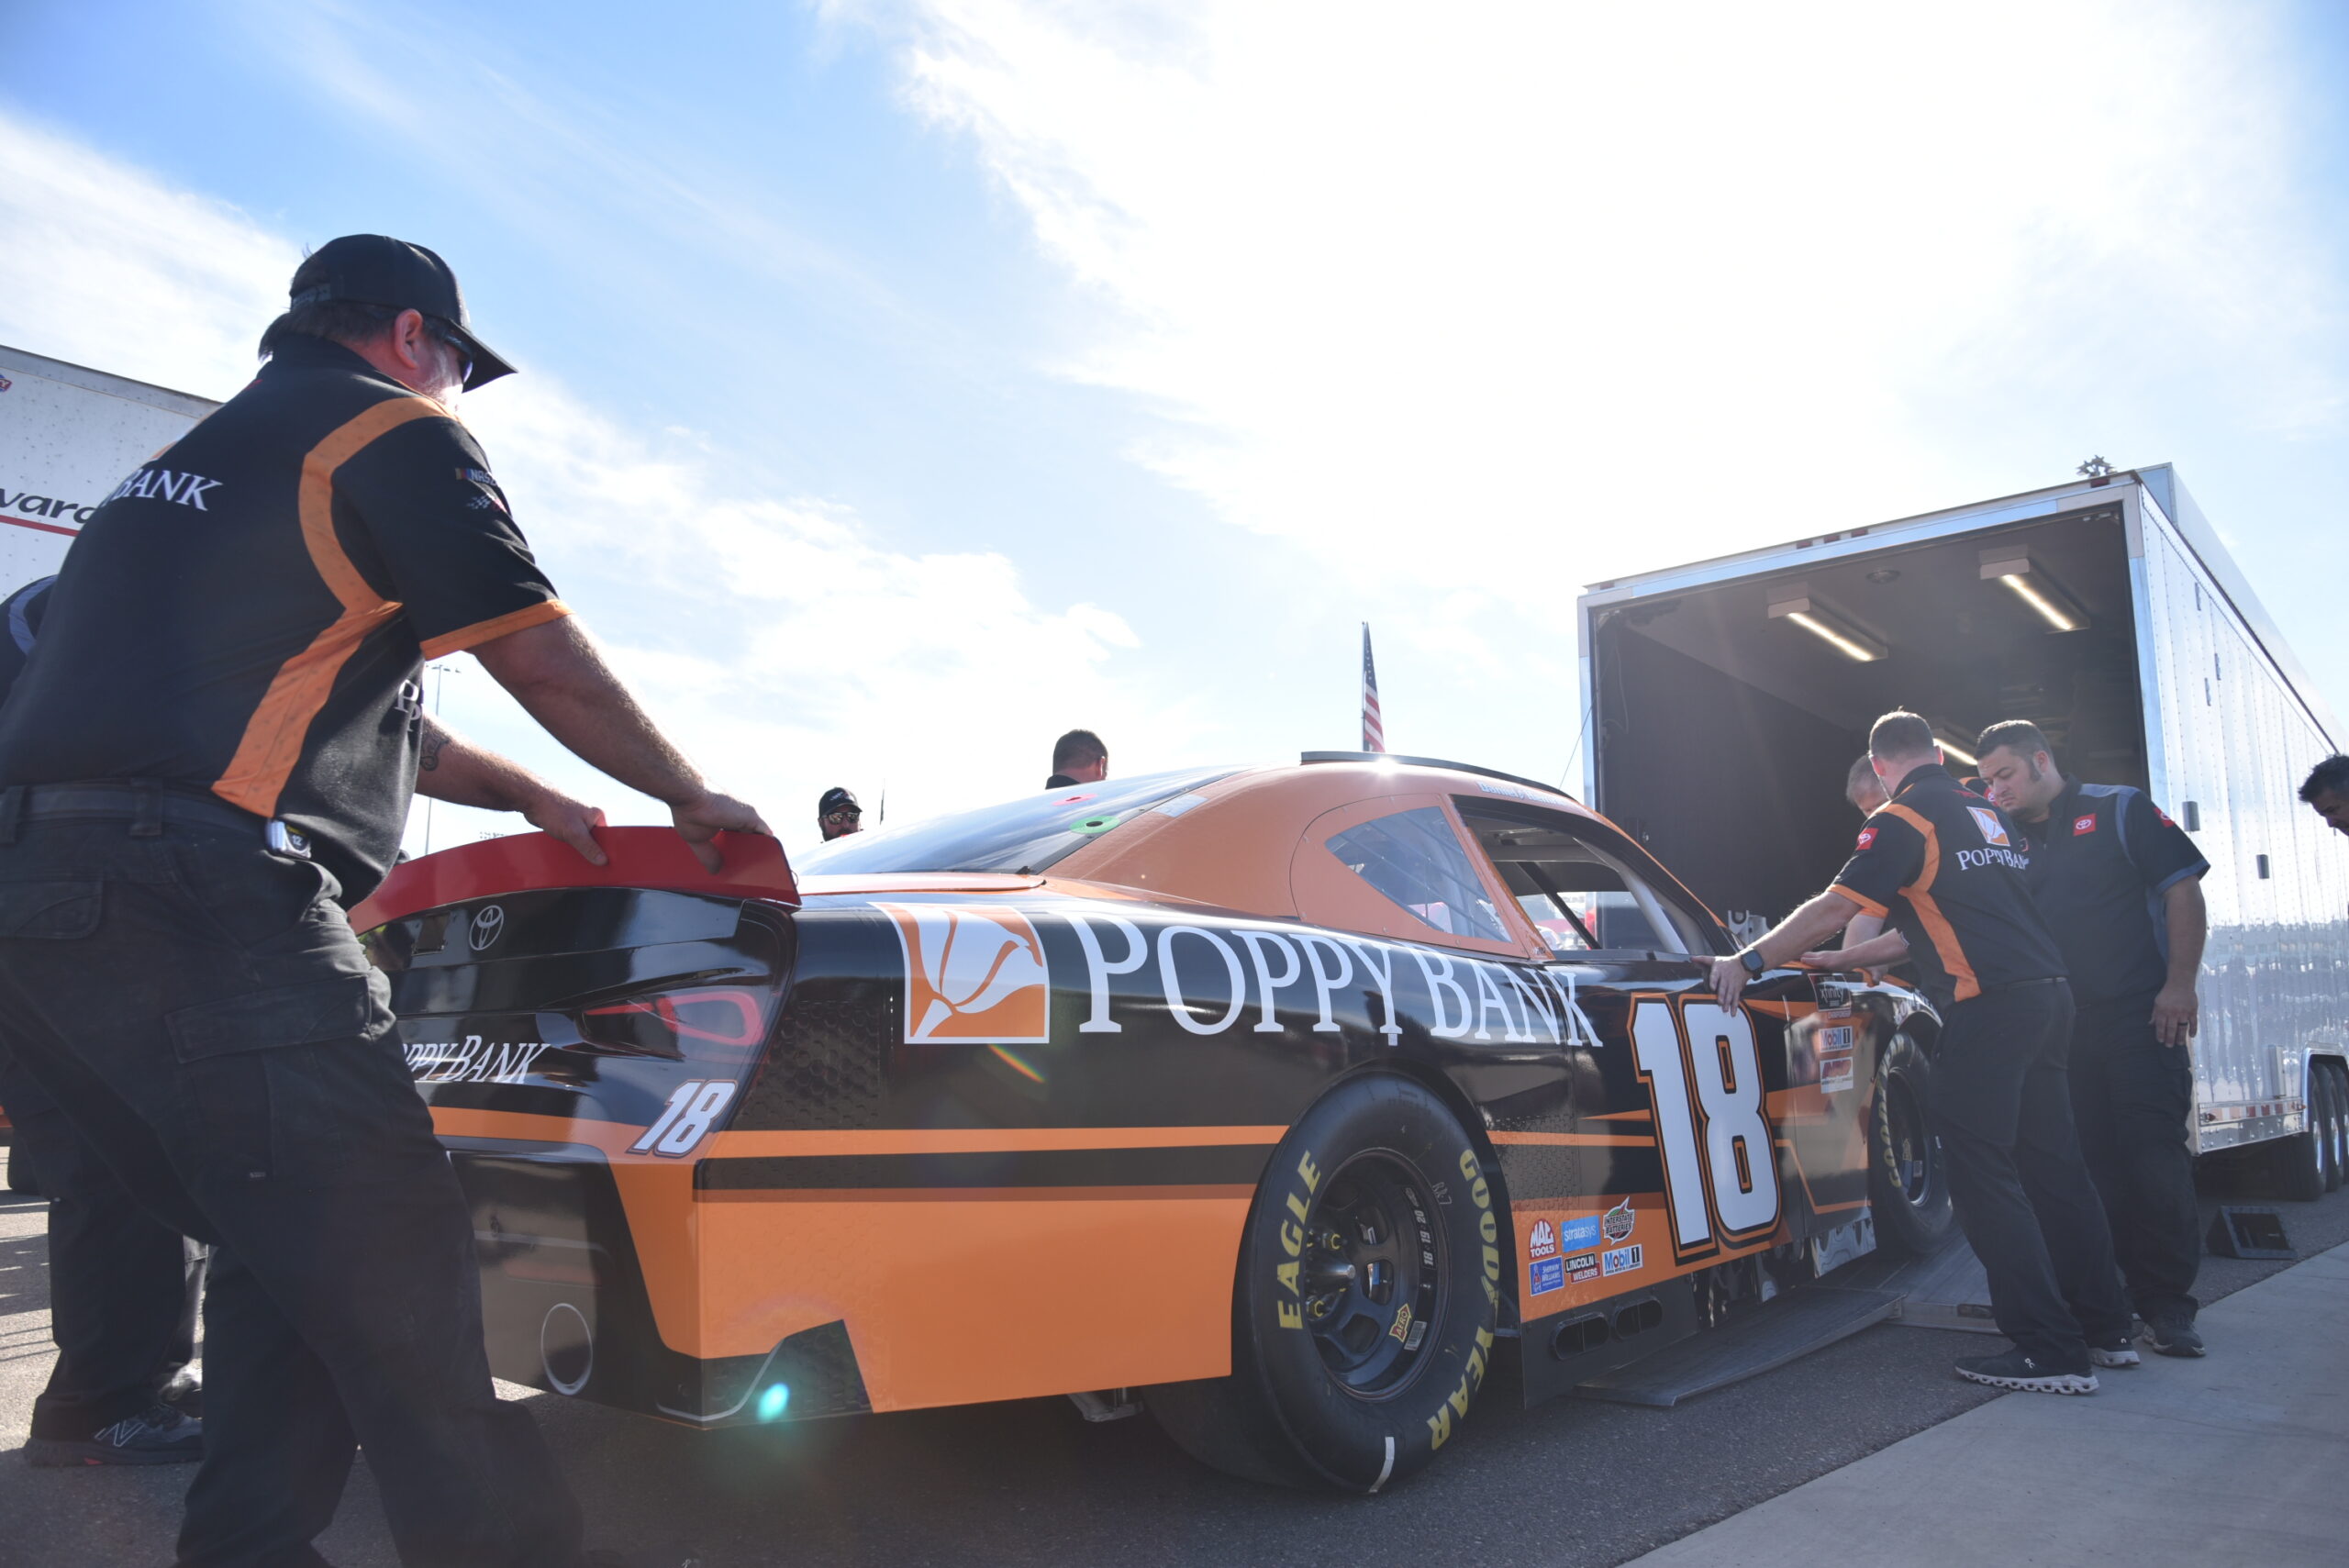 Hemric and his No. 18 team overcame a problem with their transporter ahead of Friday afternoon's practice session. (Photo: Luis Torres | The Podium Finish)